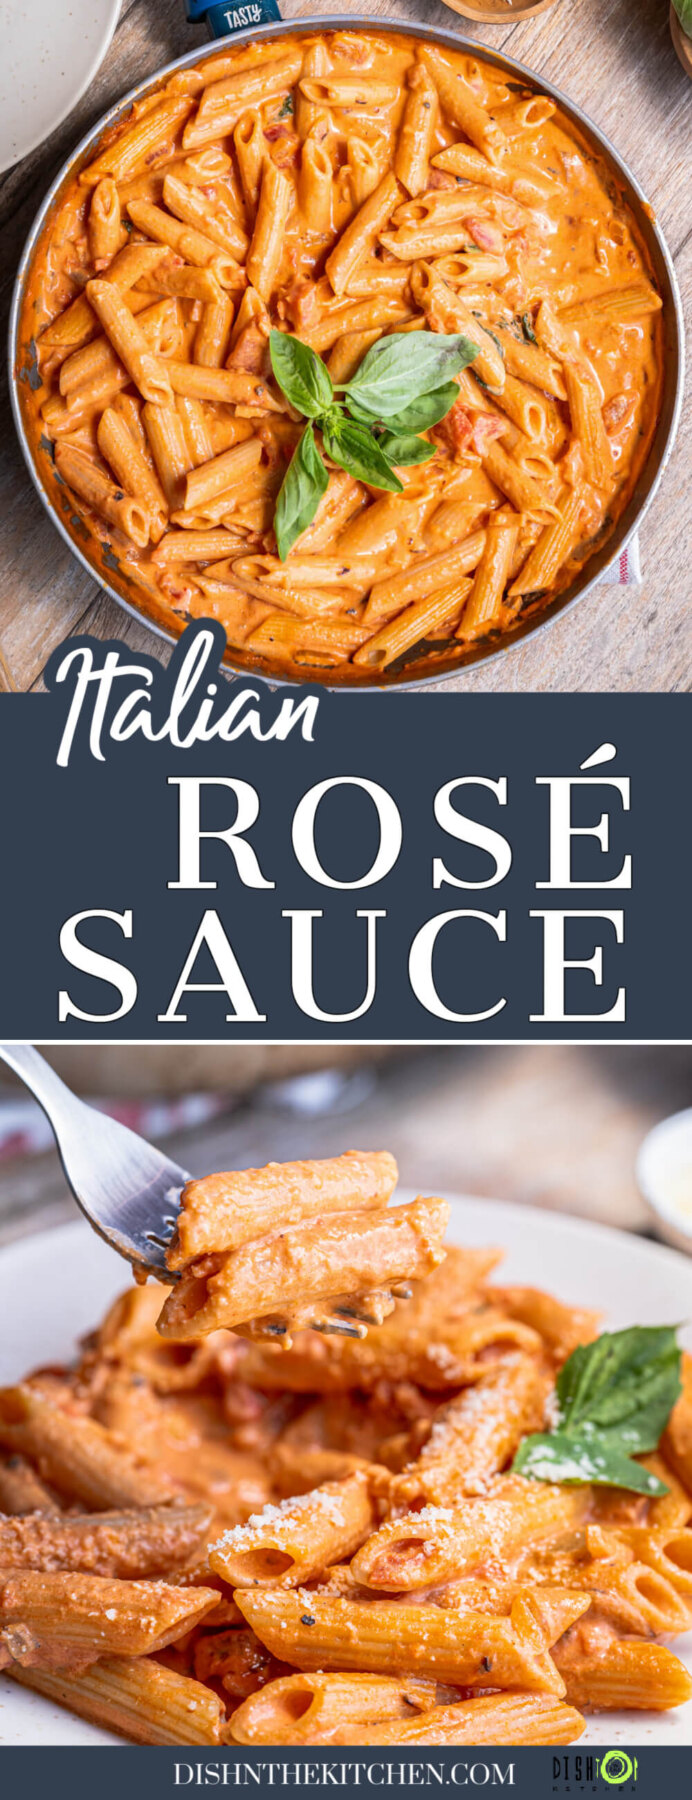 Pinterest image of a skillet and bowl full of cooked penne pasta in a creamy light orange rosé sauce.